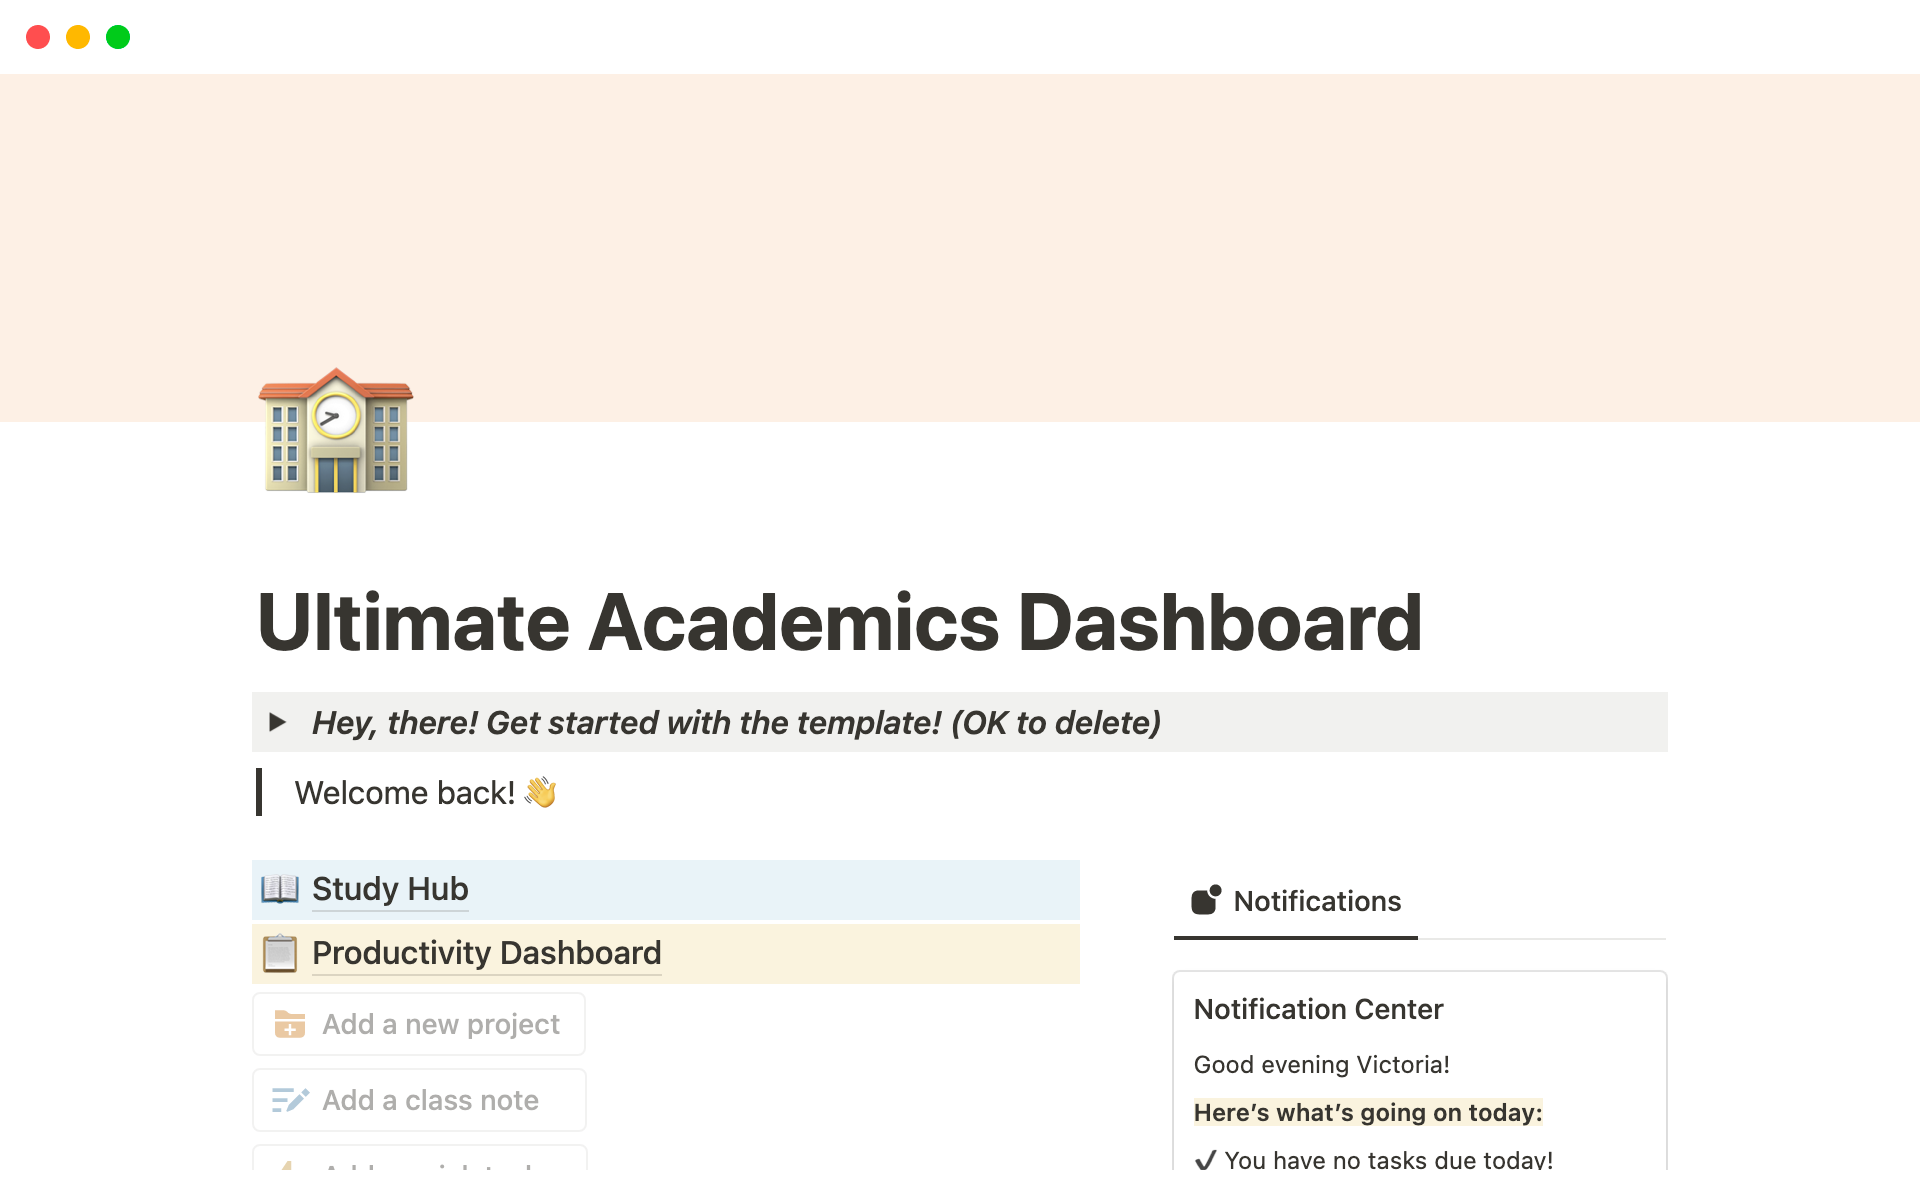 This template helps organize and track everything related to academics.